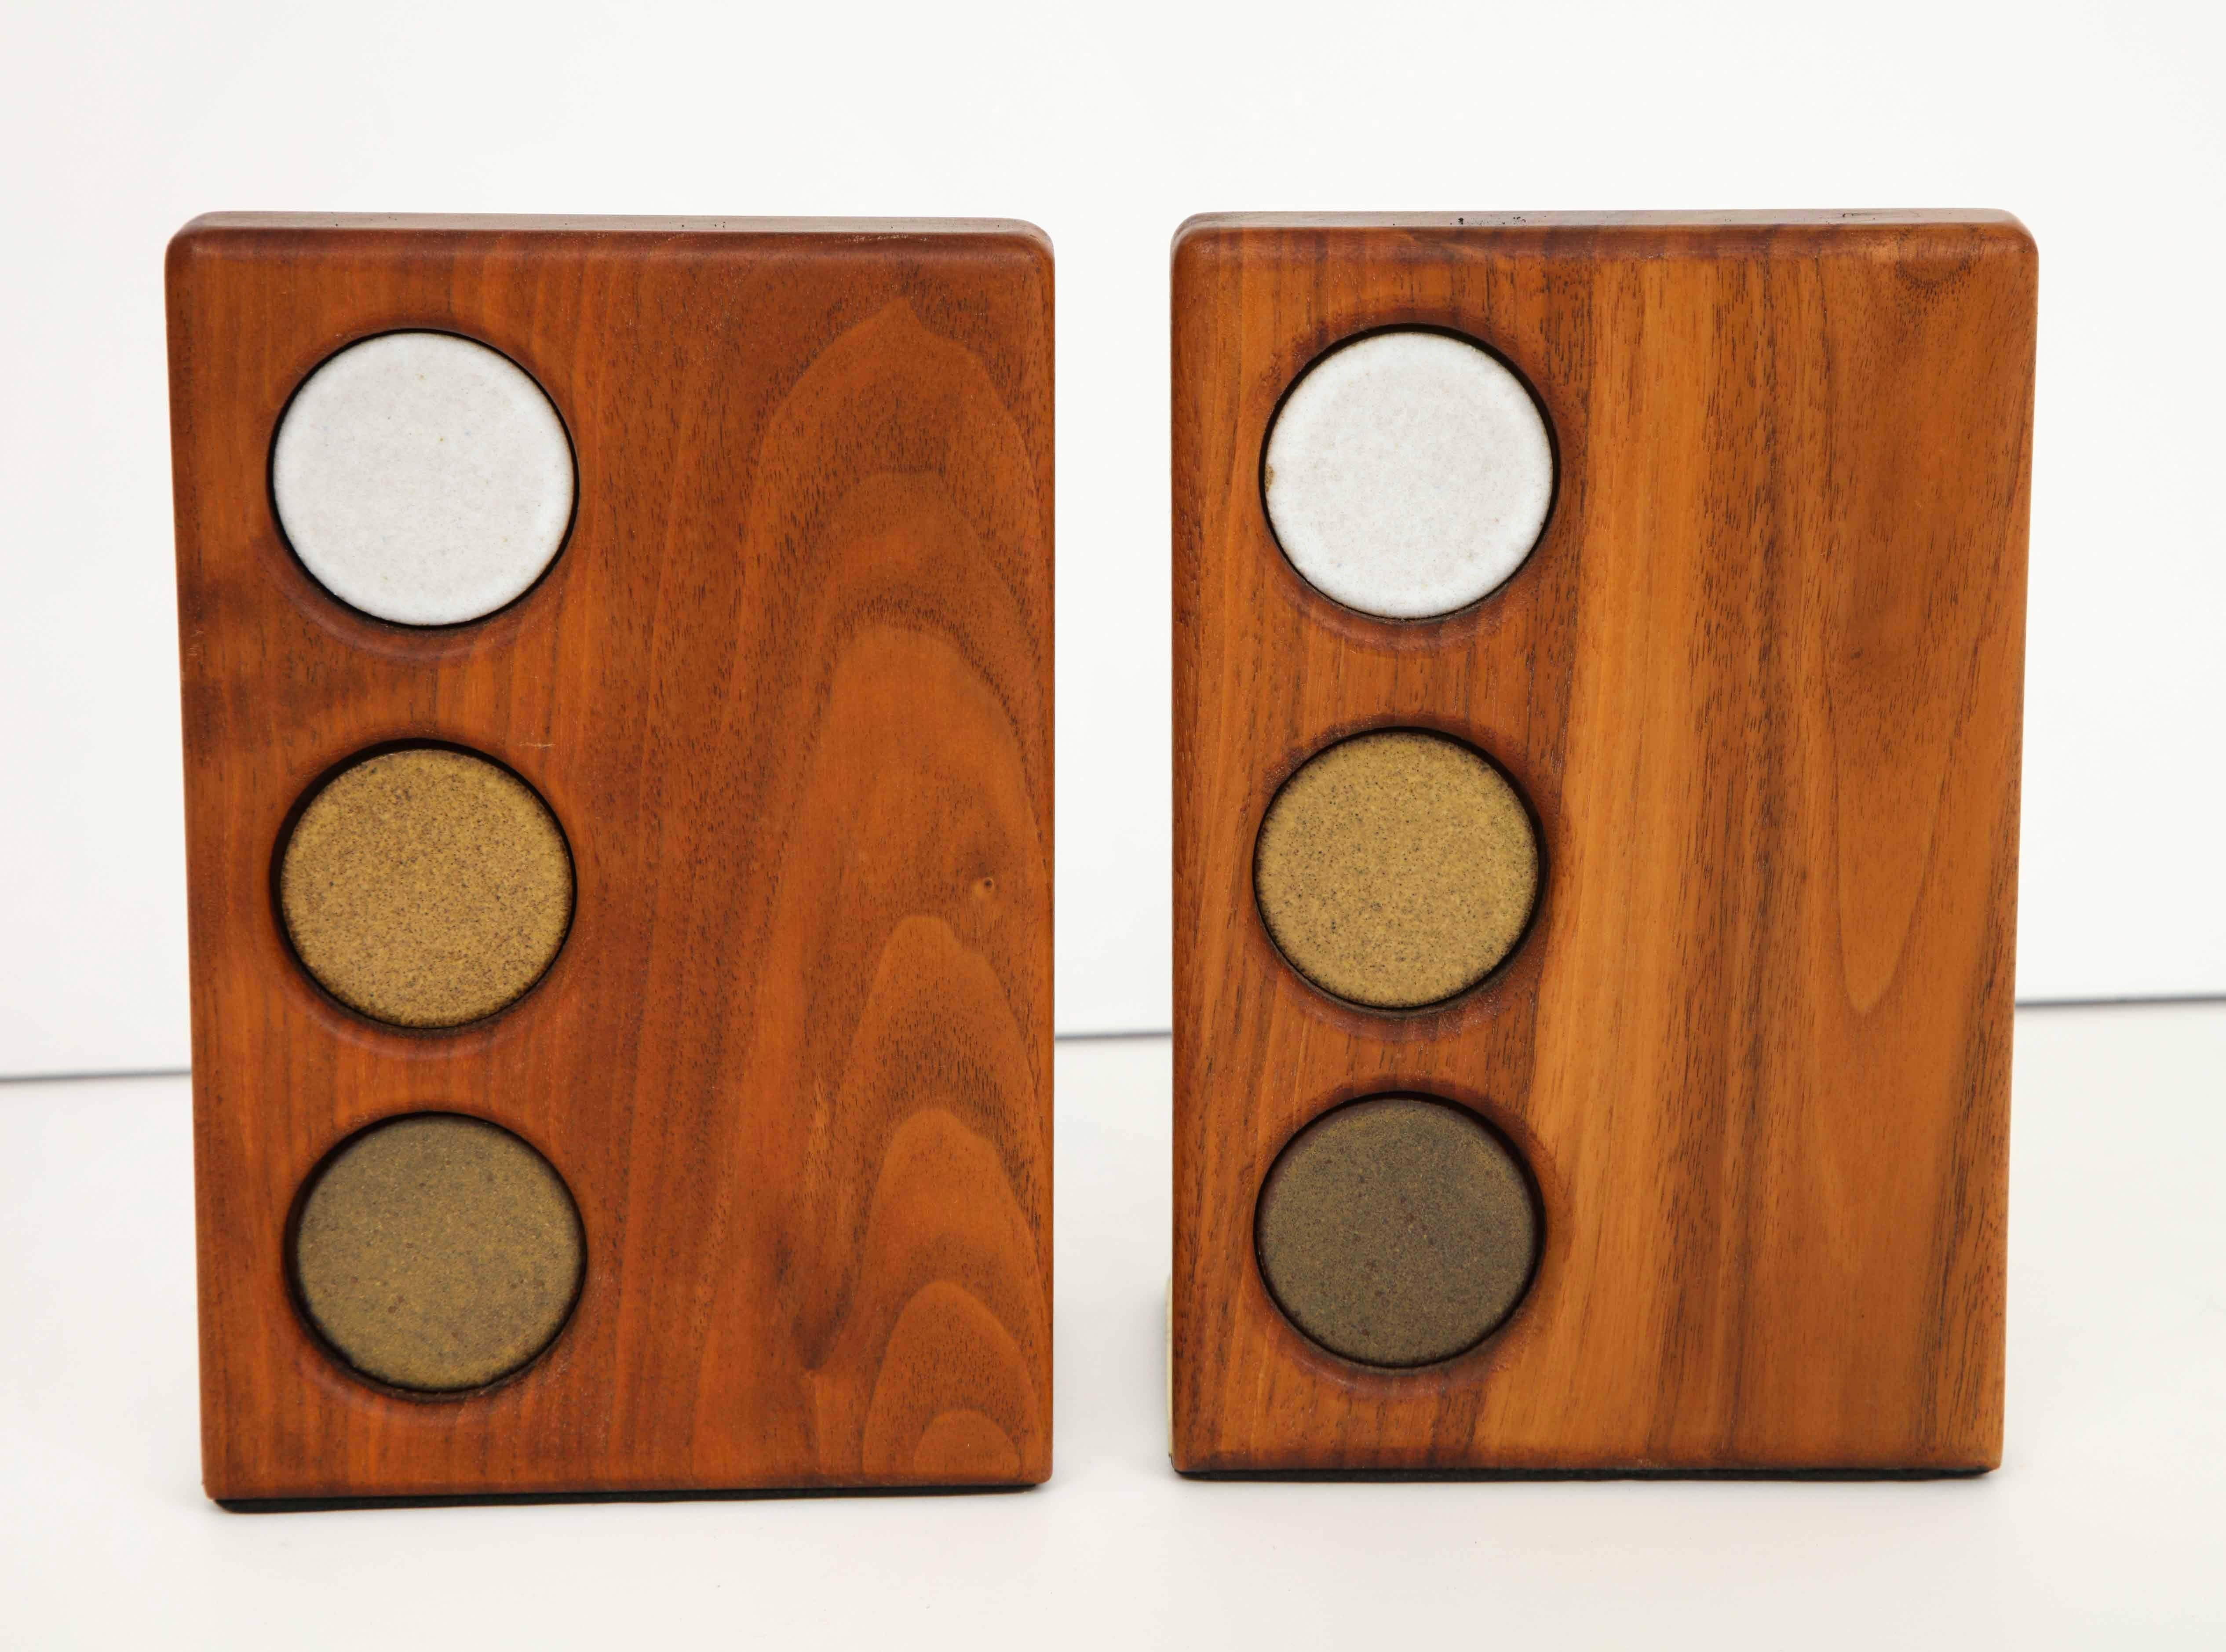 Midcentury pair of teak and brass bookends with ceramic dot inlay featuring Martz pottery classic colors of brown, tan and cream.